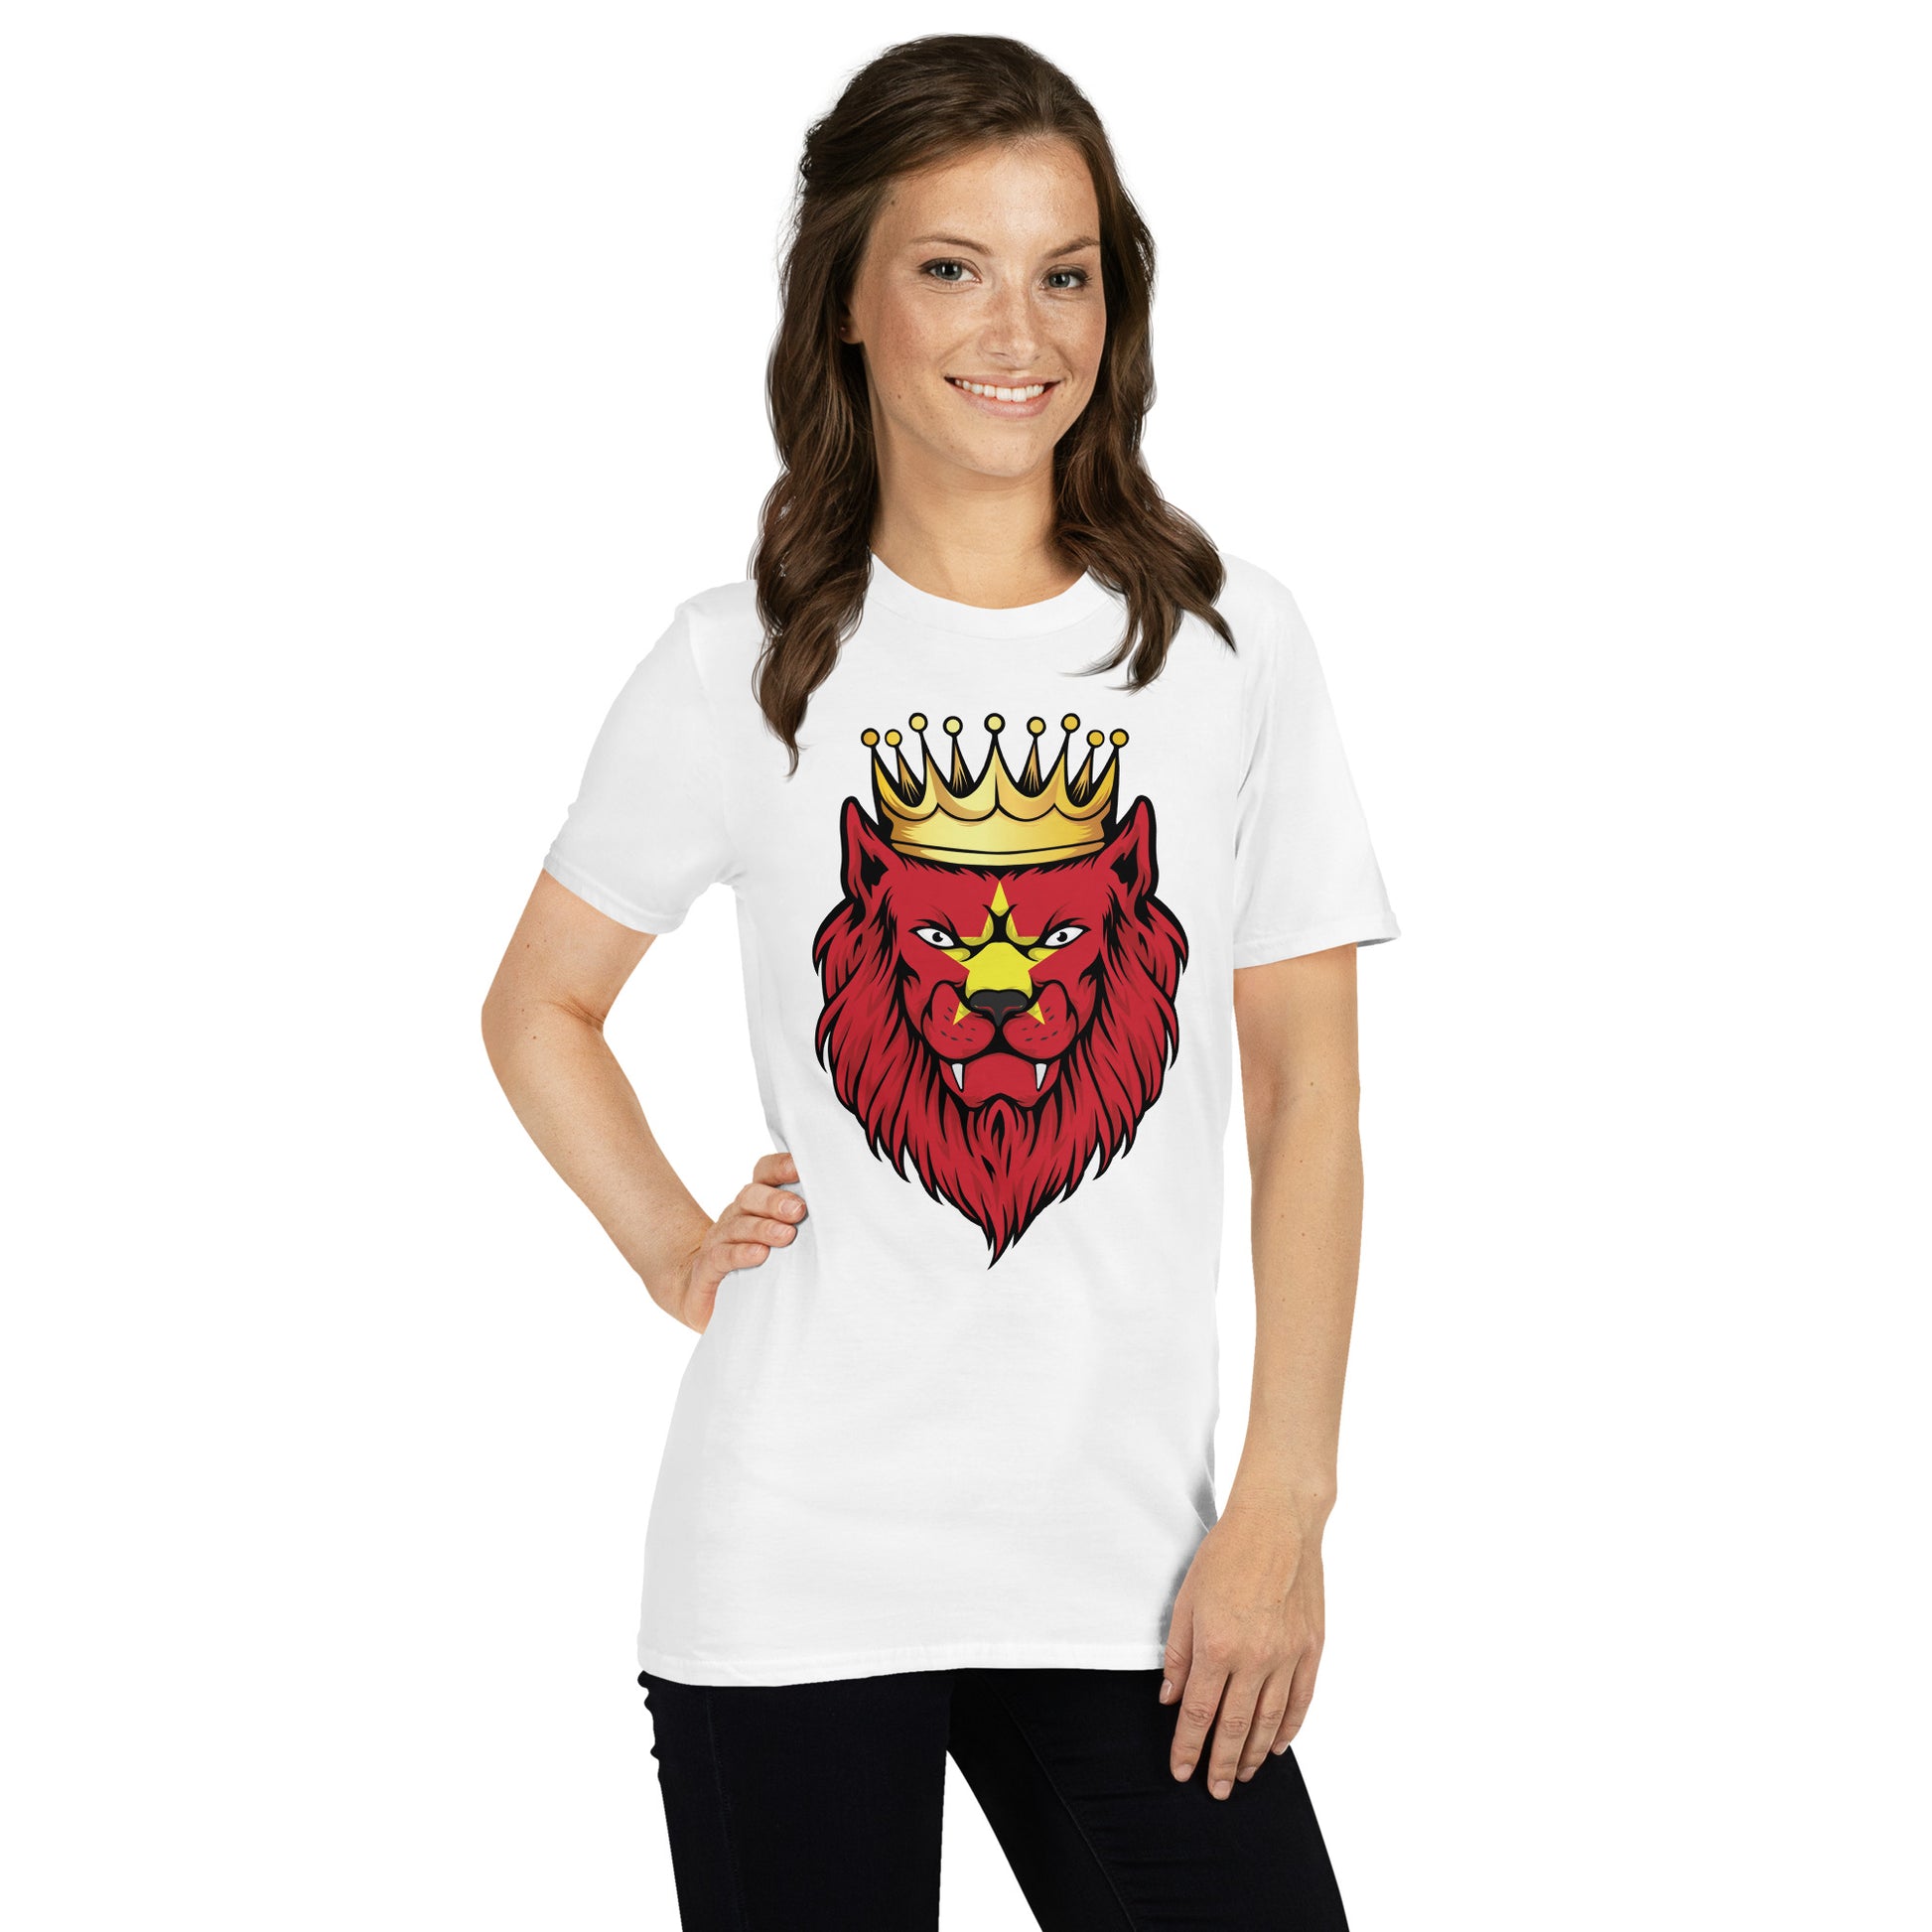 Wear Your Pride for Vietnam with this Lion T-shirt